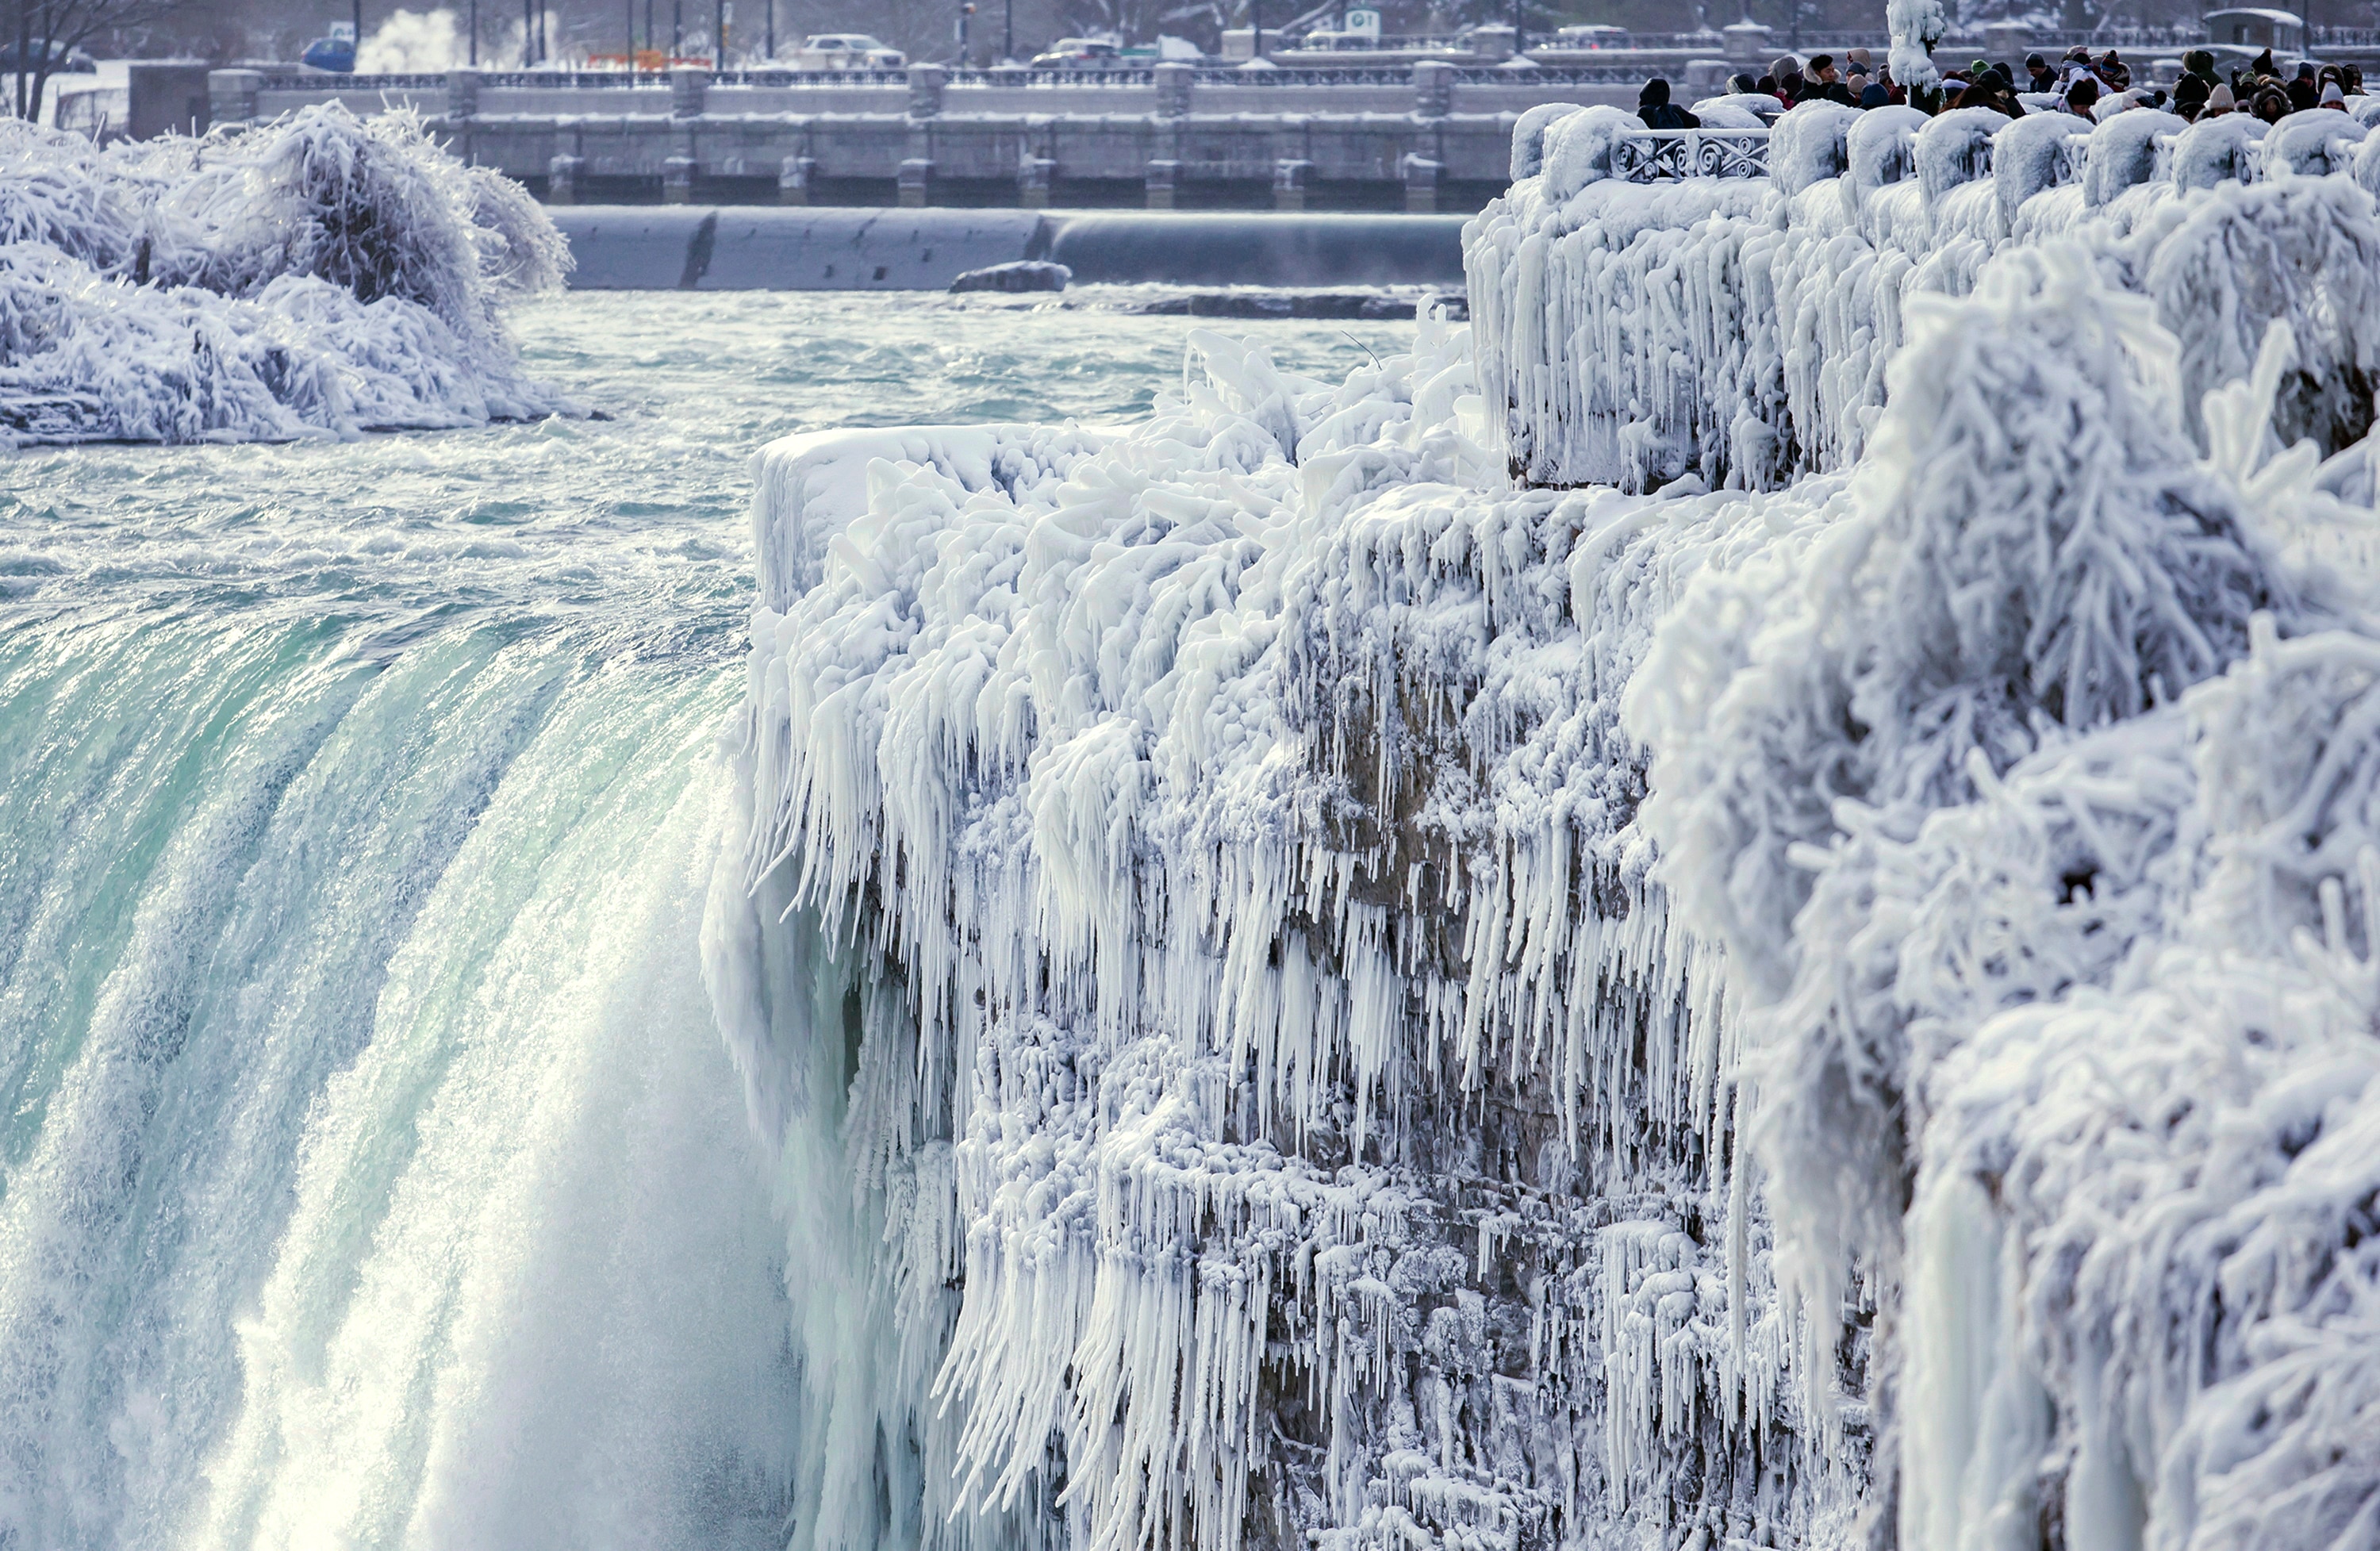 If the icy temperatures continue, Niagara Falls could freeze over completely in January.